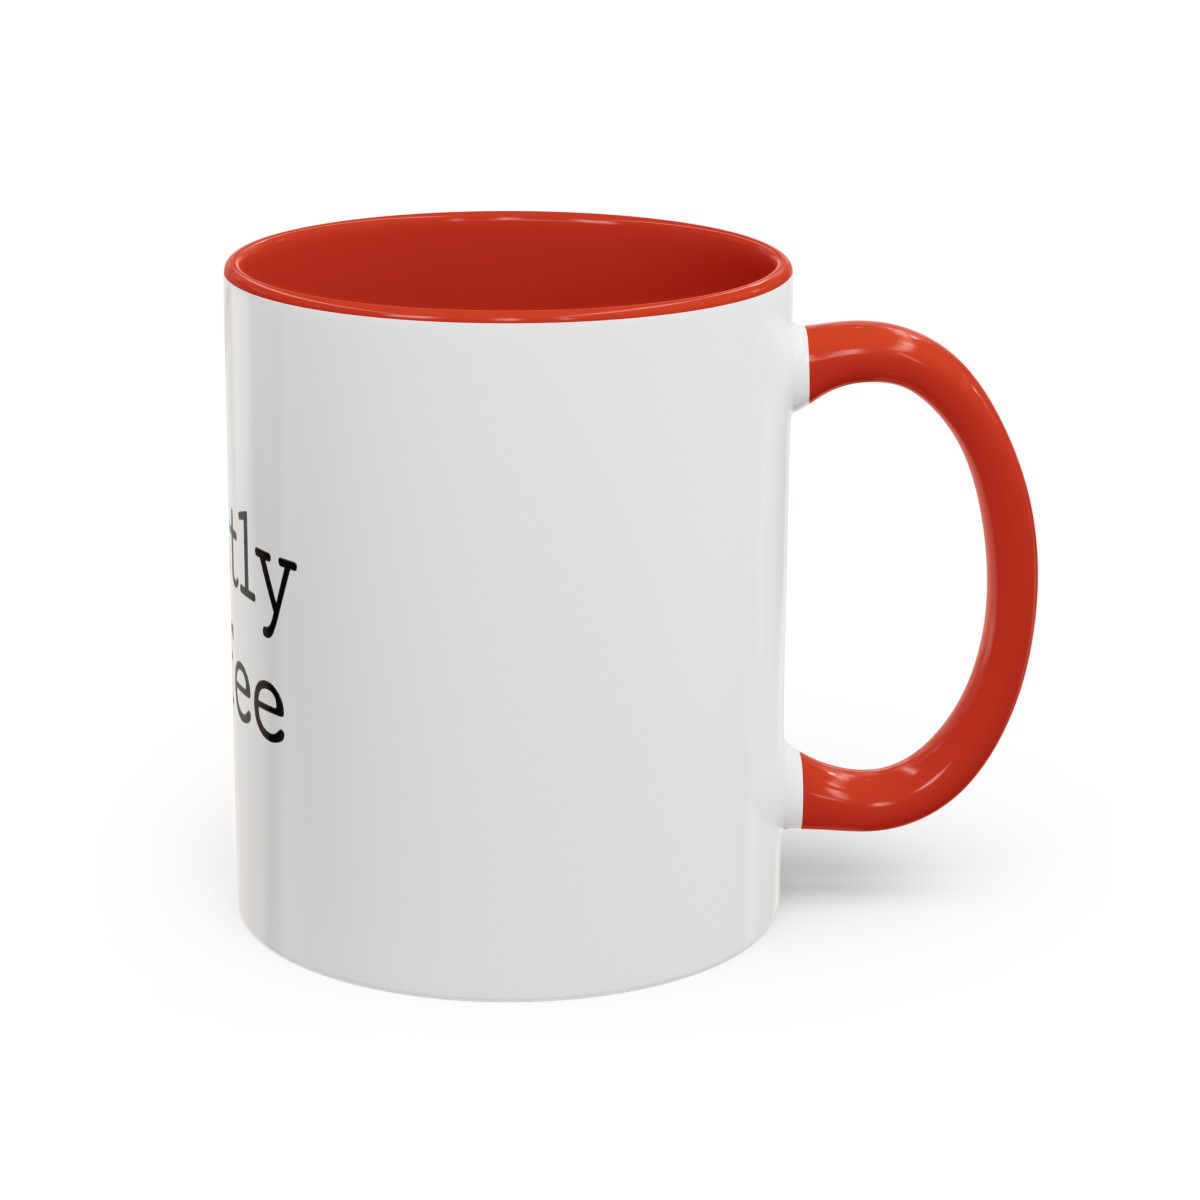 Mostly Coffee - Accent Coffee Mug, 11oz product thumbnail image